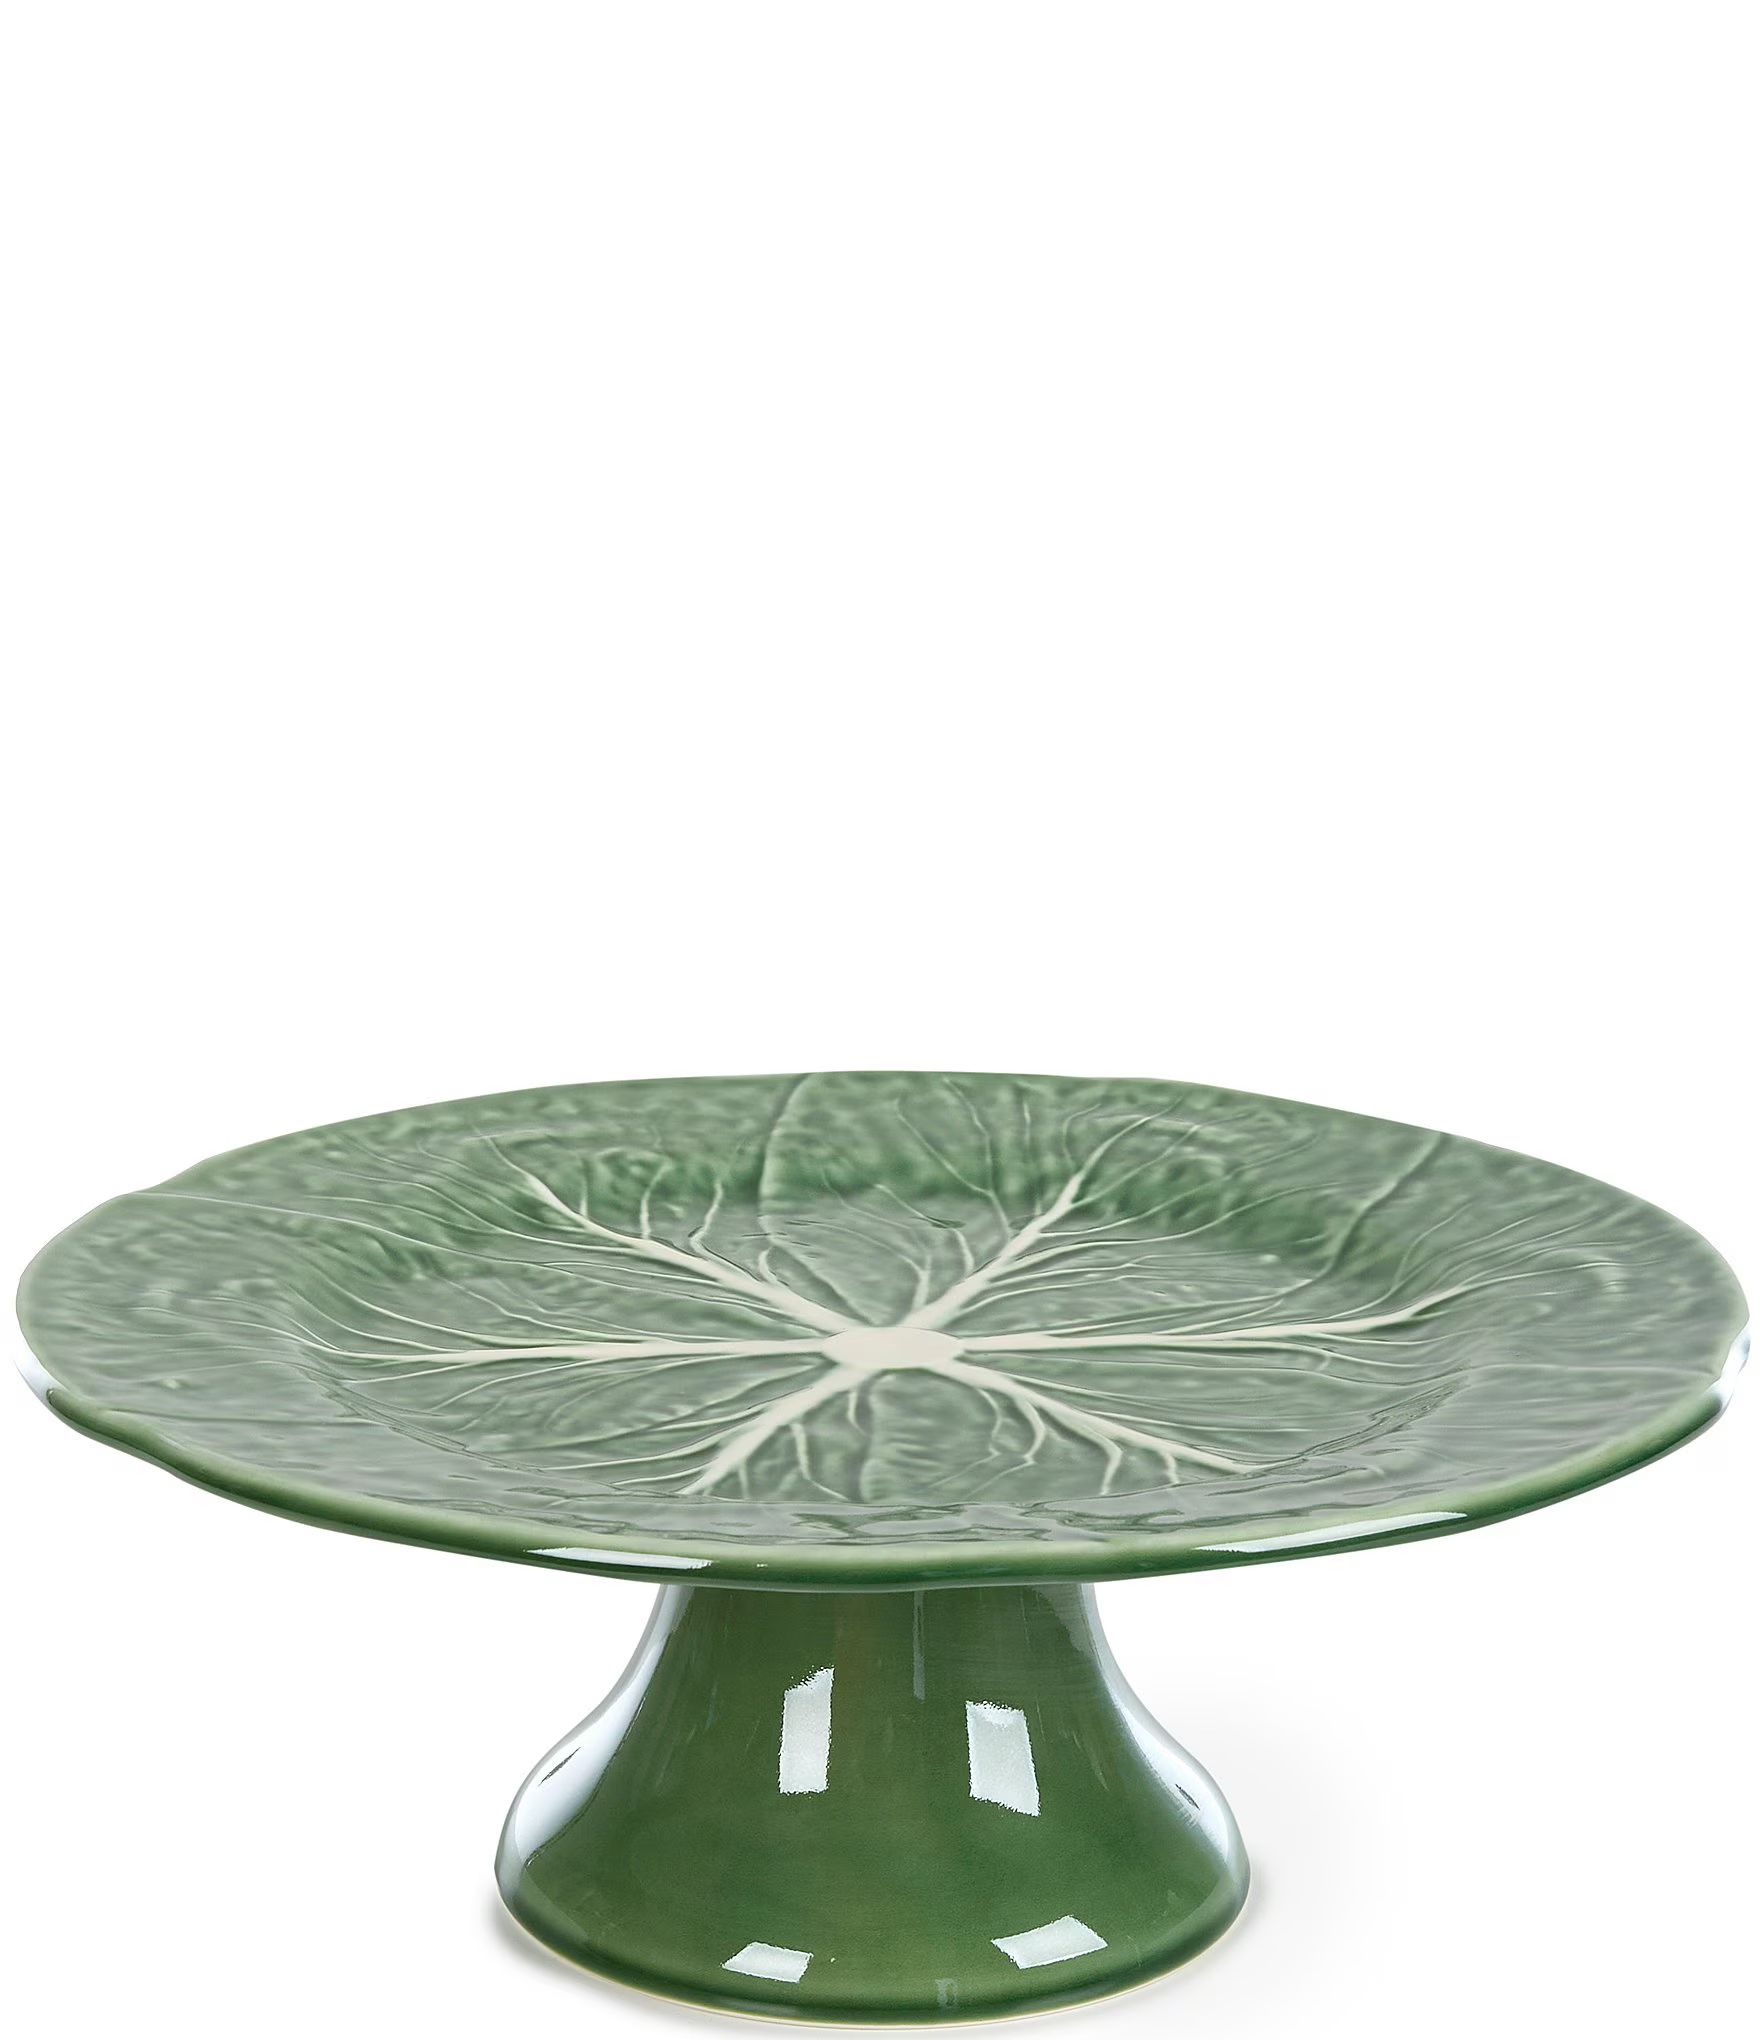 Cabbage Footed Cake Plate | Dillards